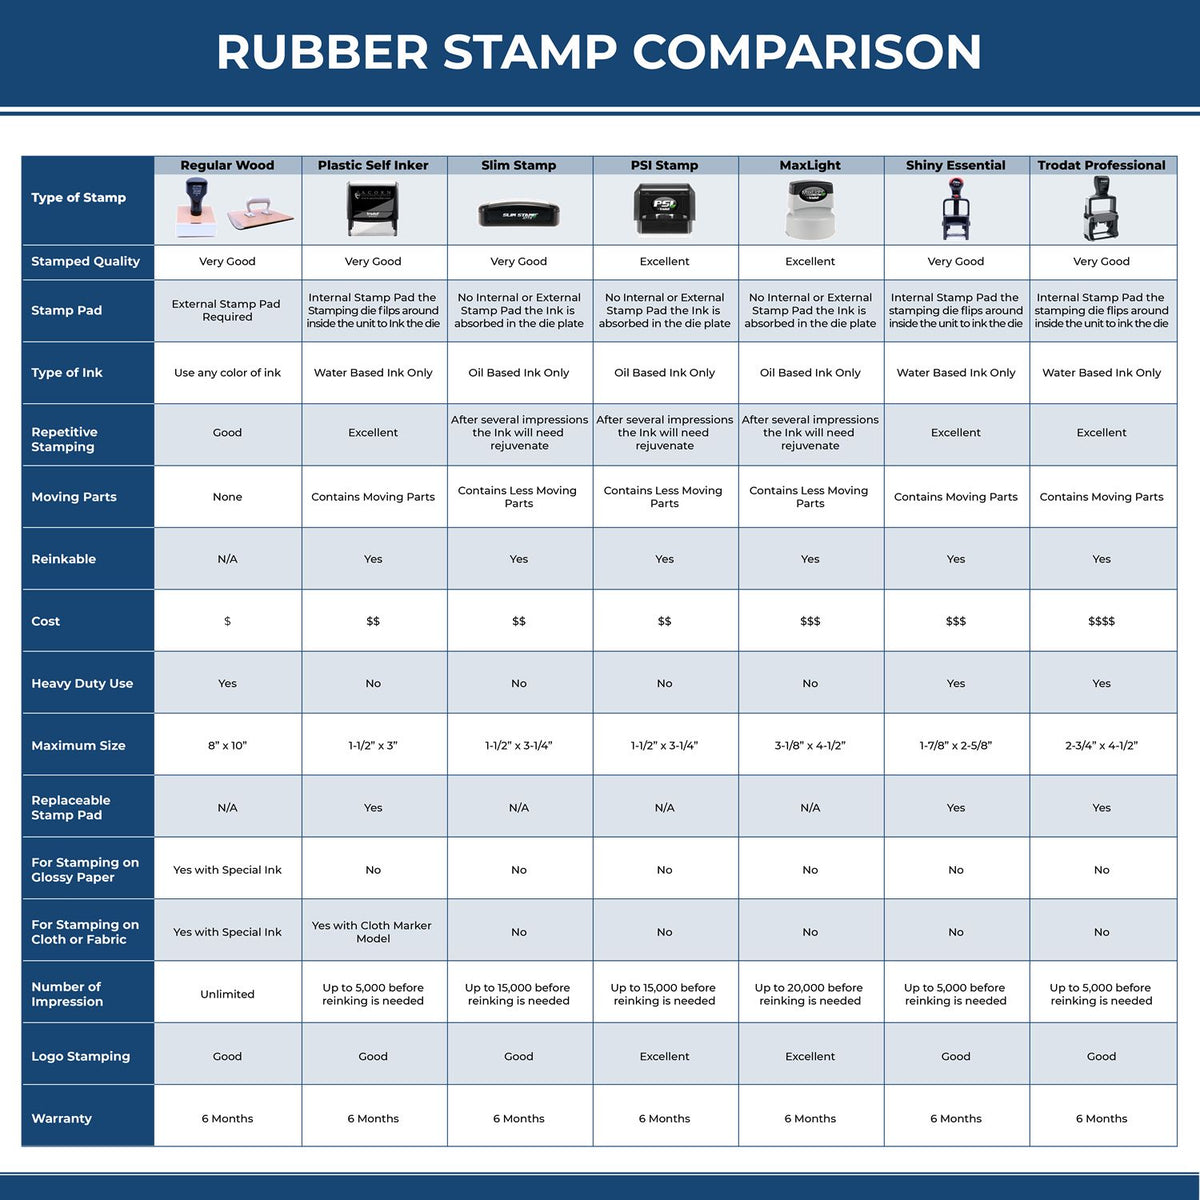 A comparison chart for the different types of mount models available for the Virginia Professional Engineer Seal Stamp.